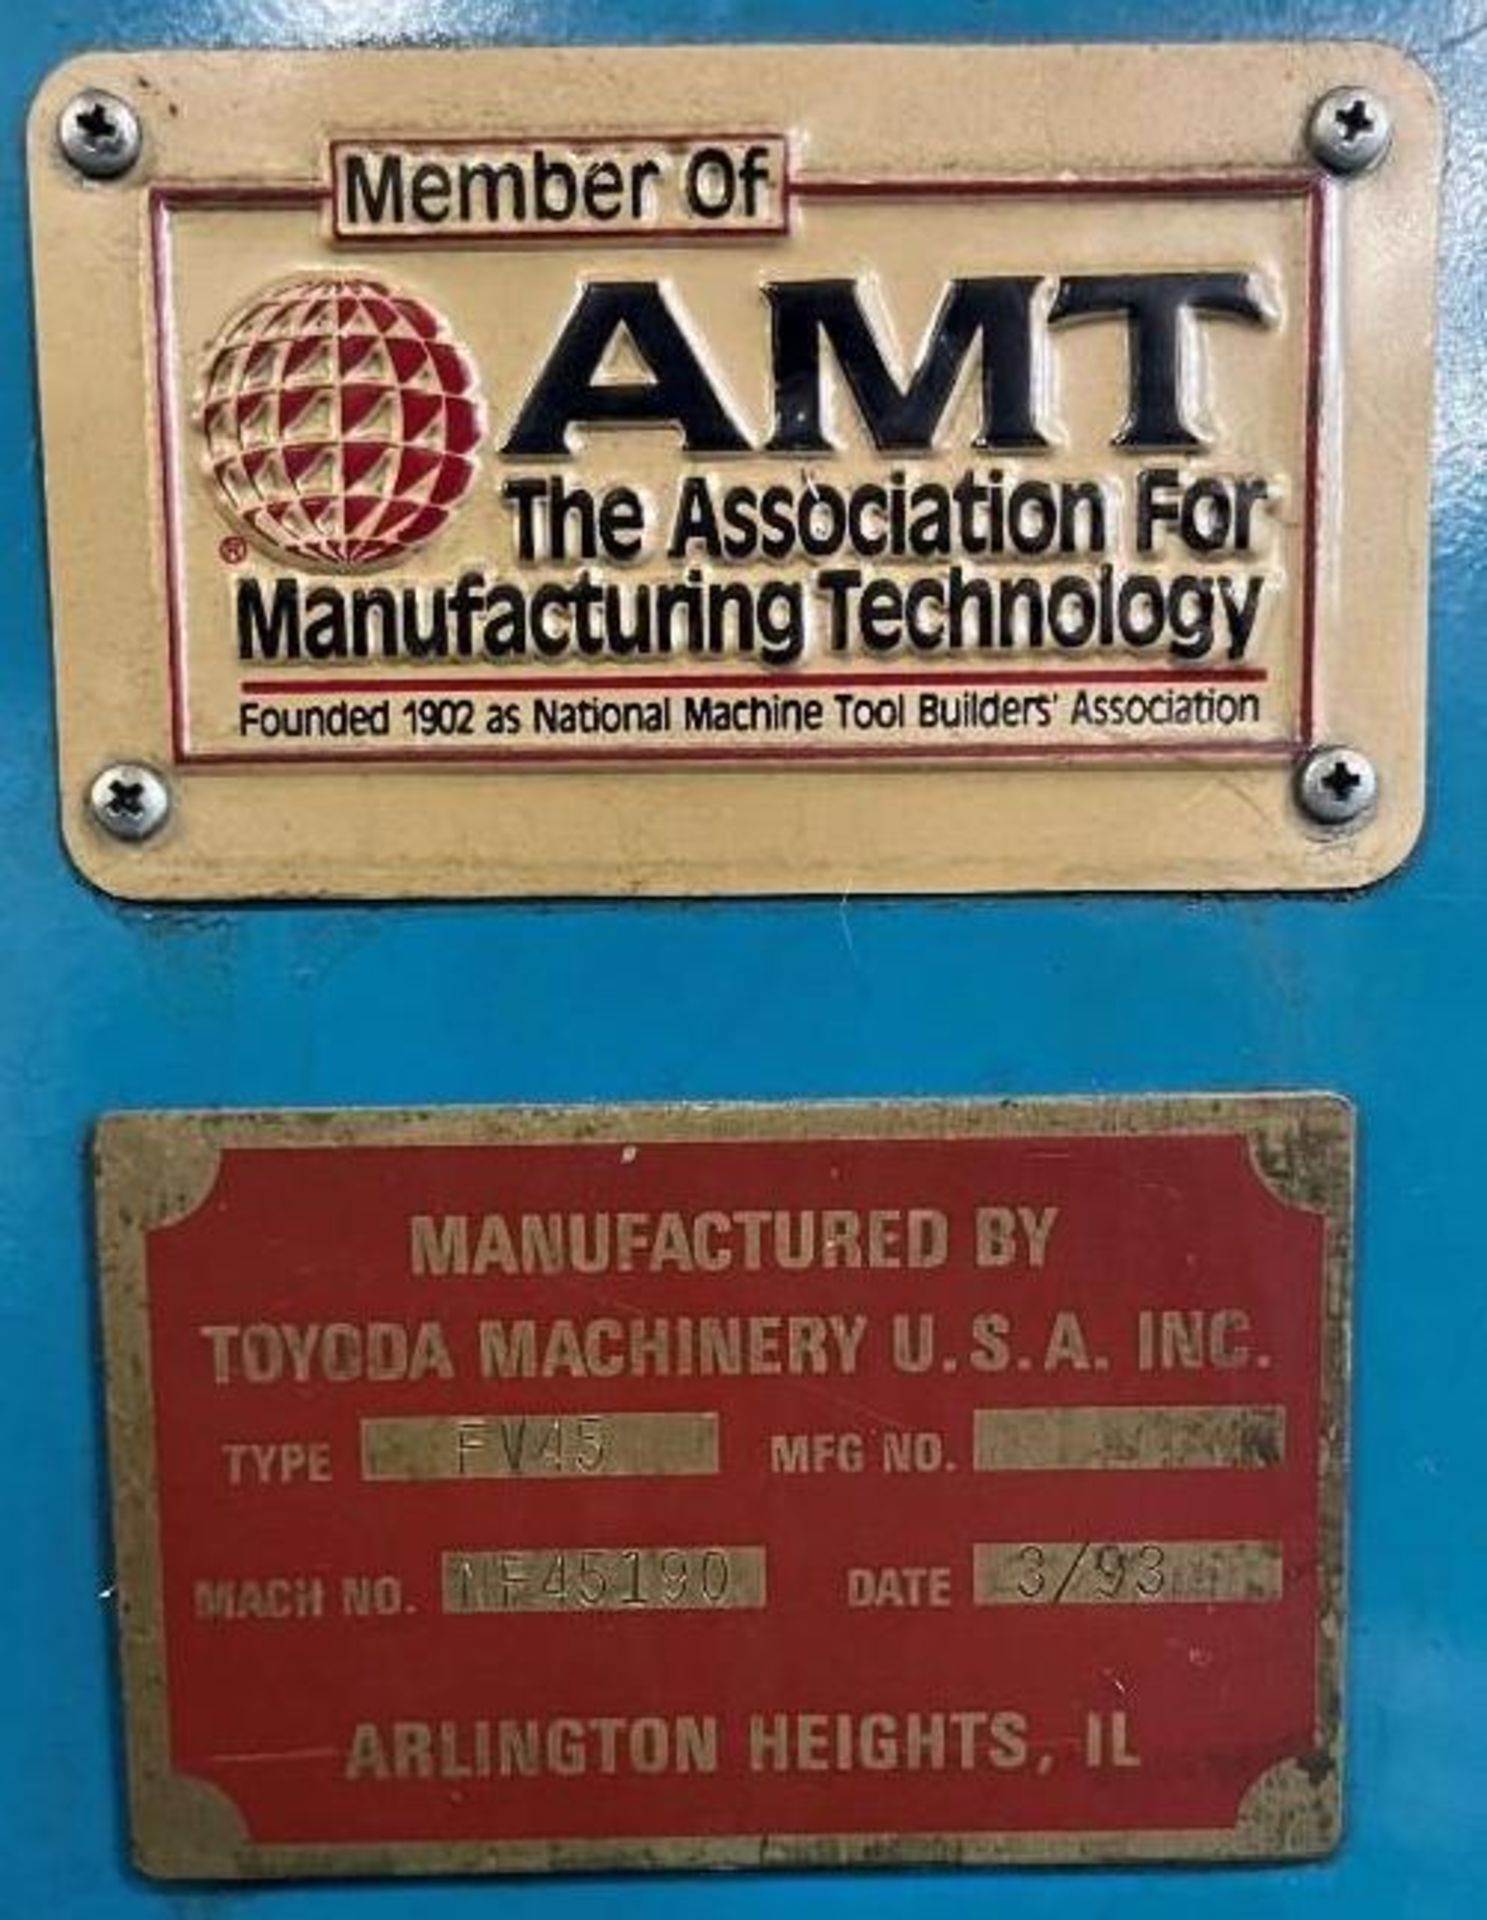 1993 Toyoda FV45 Vertical Machining Center - Image 4 of 12